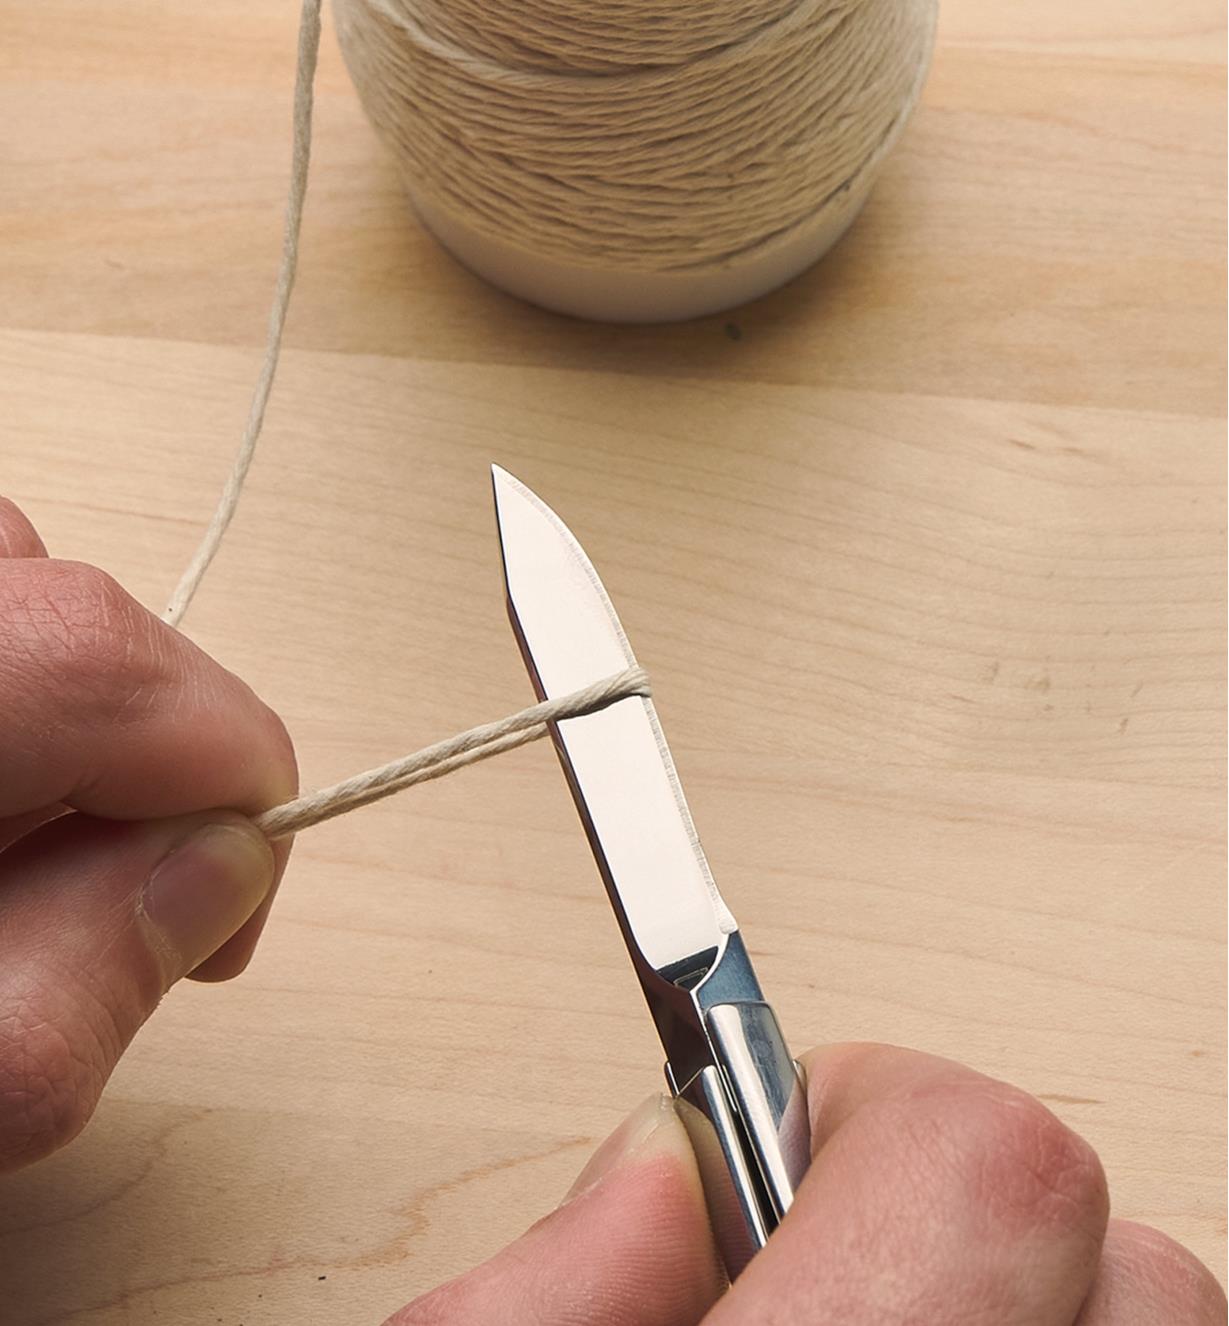 Cutting twine with a Cube Knife